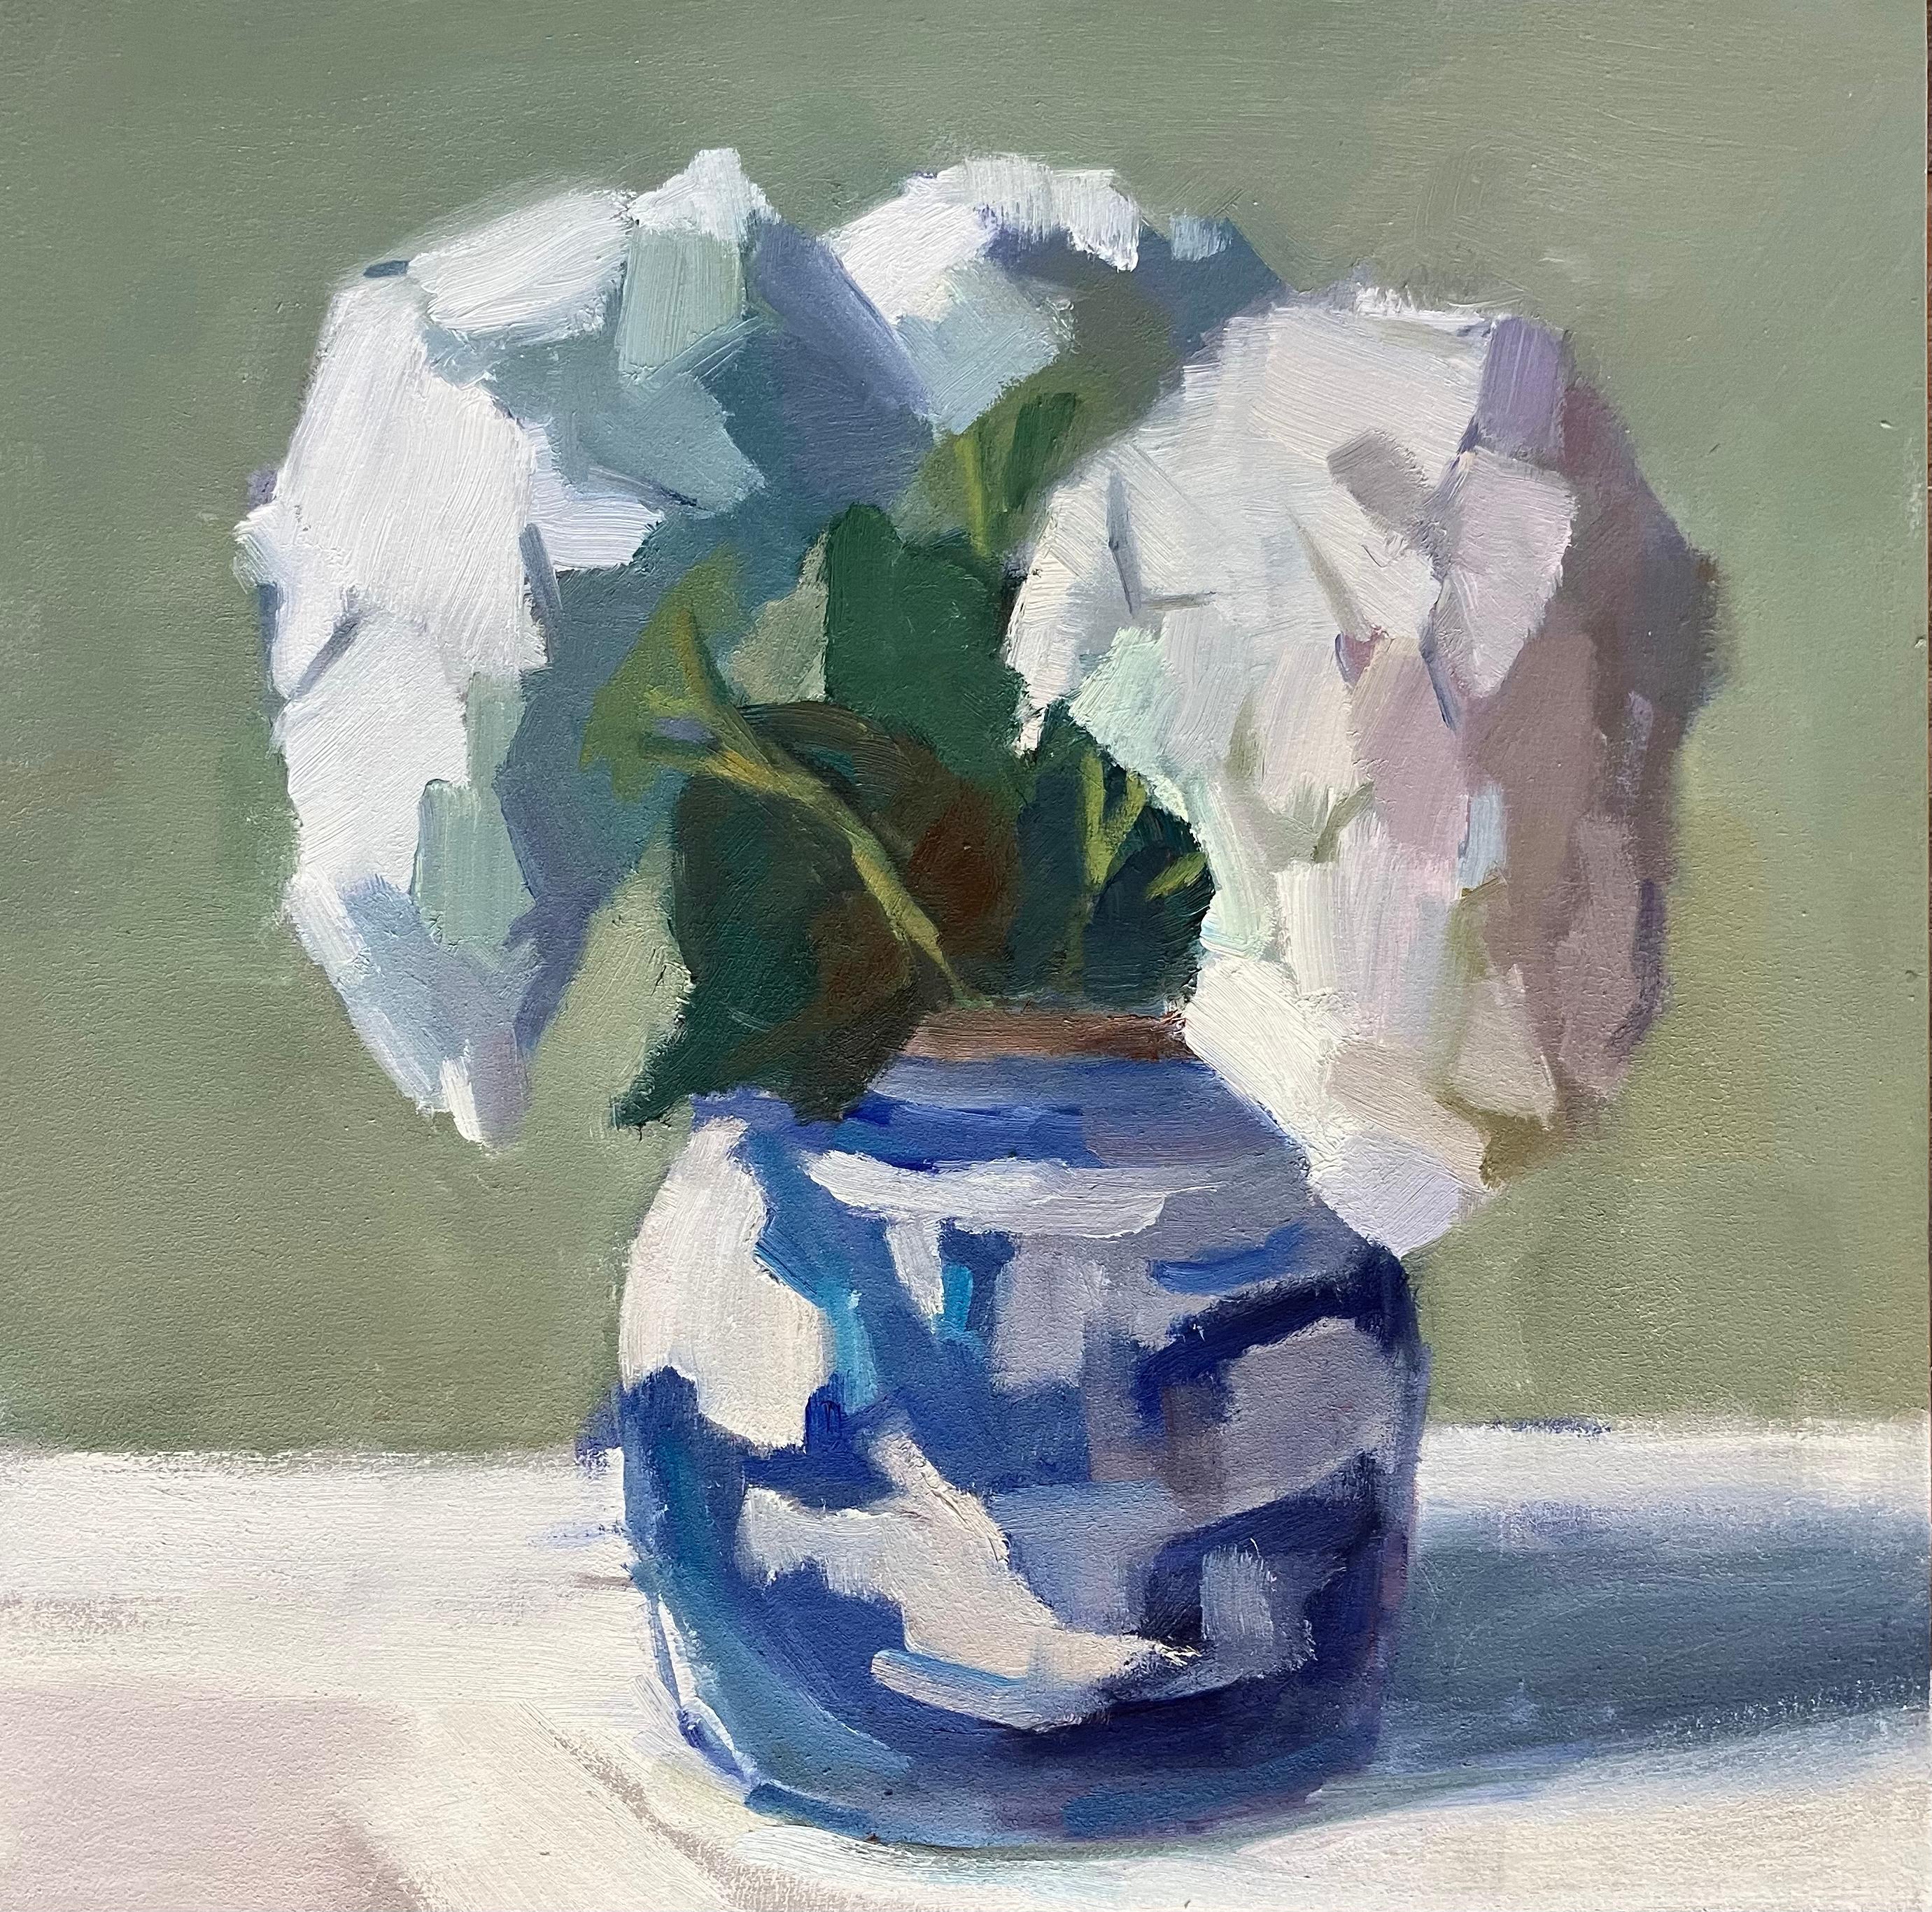 Unframed this piece measures 12"H x 12"W

Lesley Powell paints in oils with a classical approach to composition and color, but she has a point of view that is fresh and contemporary. Whenever possible, she prefers to paint from life. 

She often